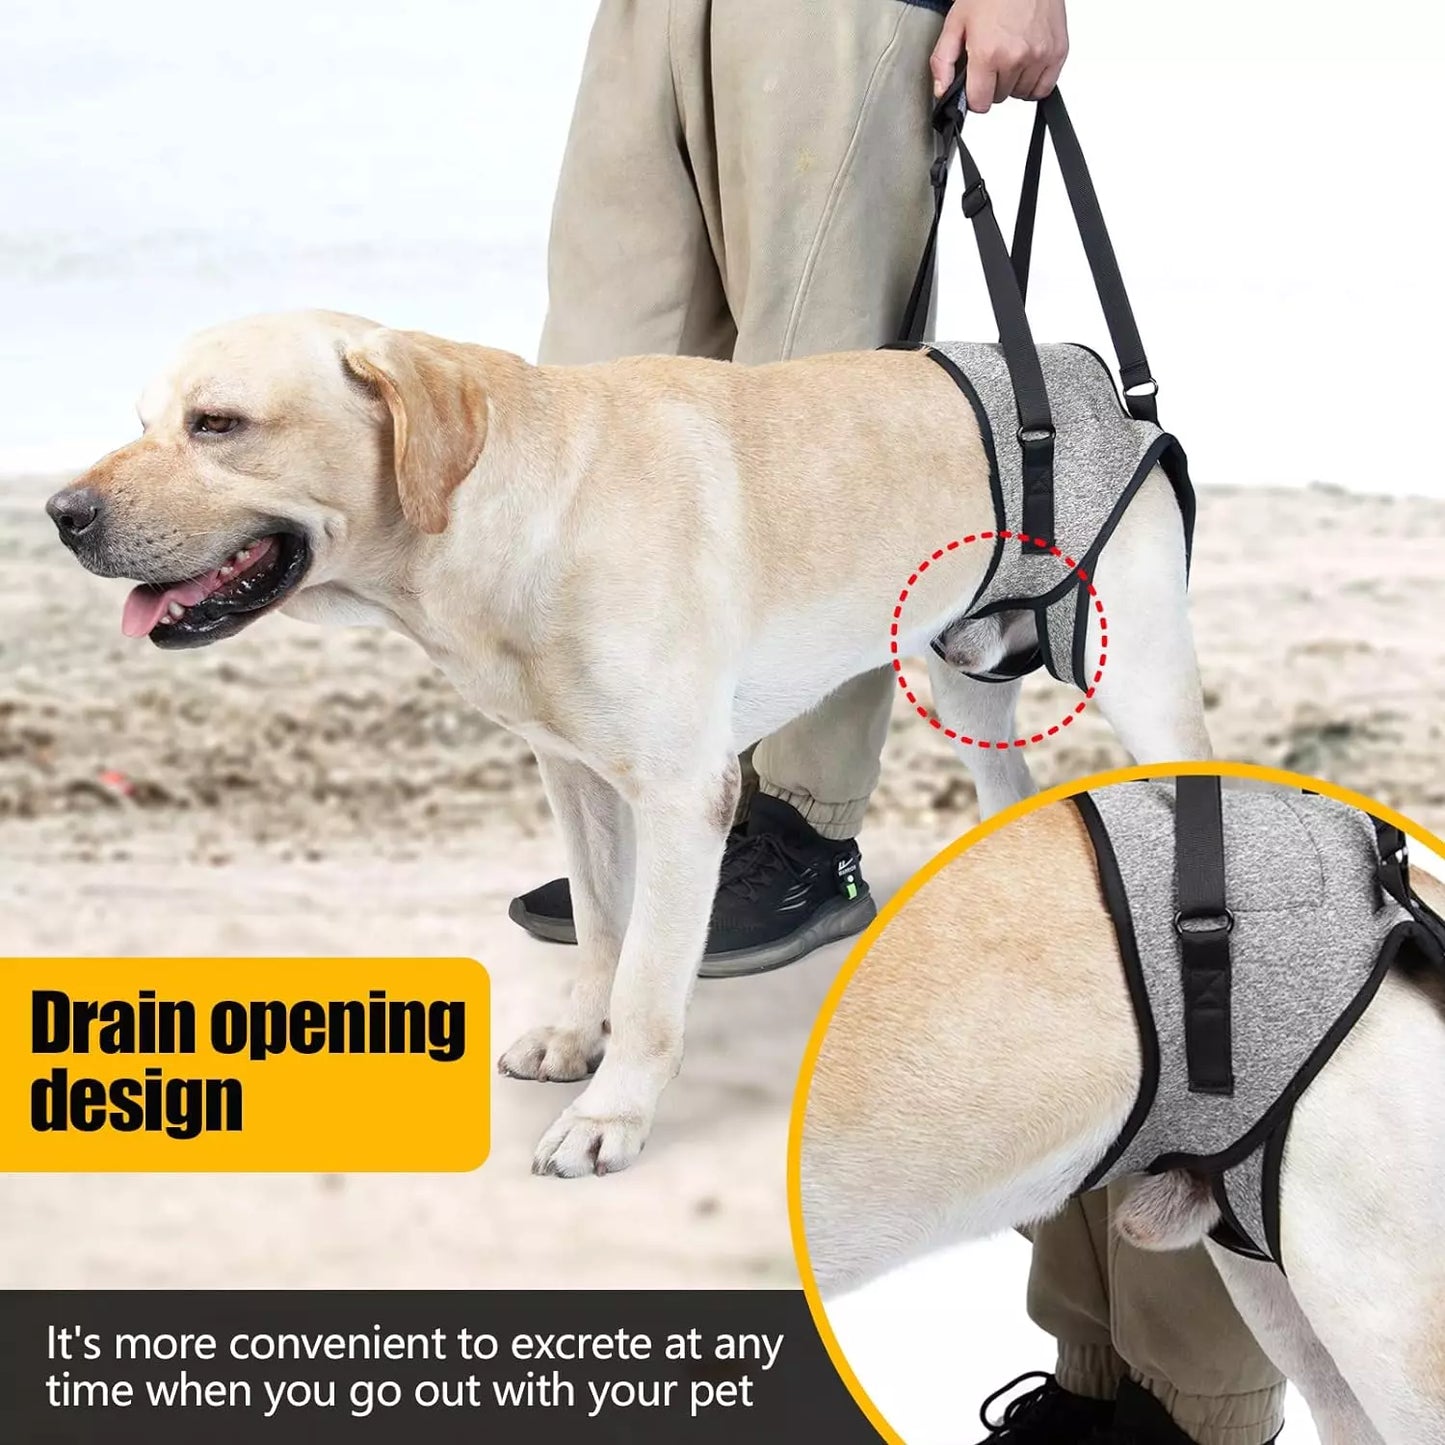 Help Em Up Dog Harness for Back Legs for Elderly Dogs with Weak Hind Legs, Disabilities, Arthritis, or ACL Recovery